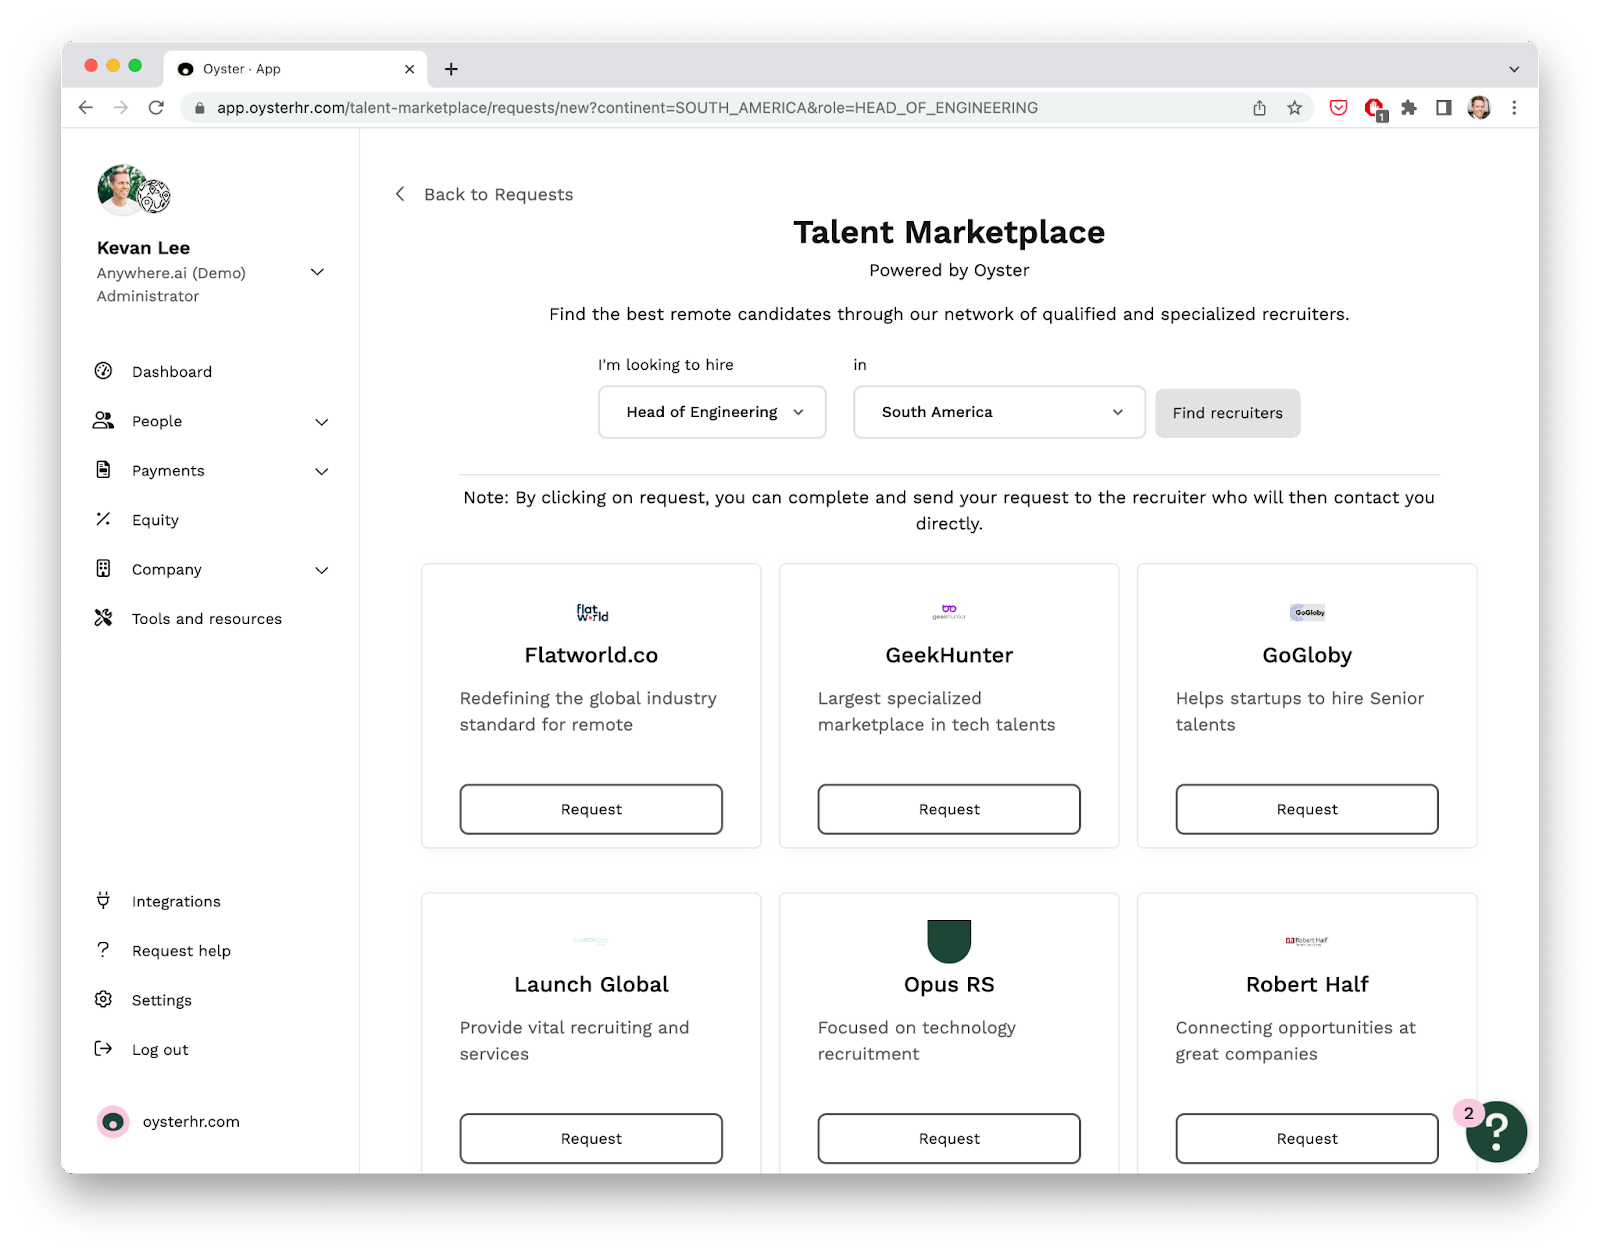 Oyster: The talent marketplace